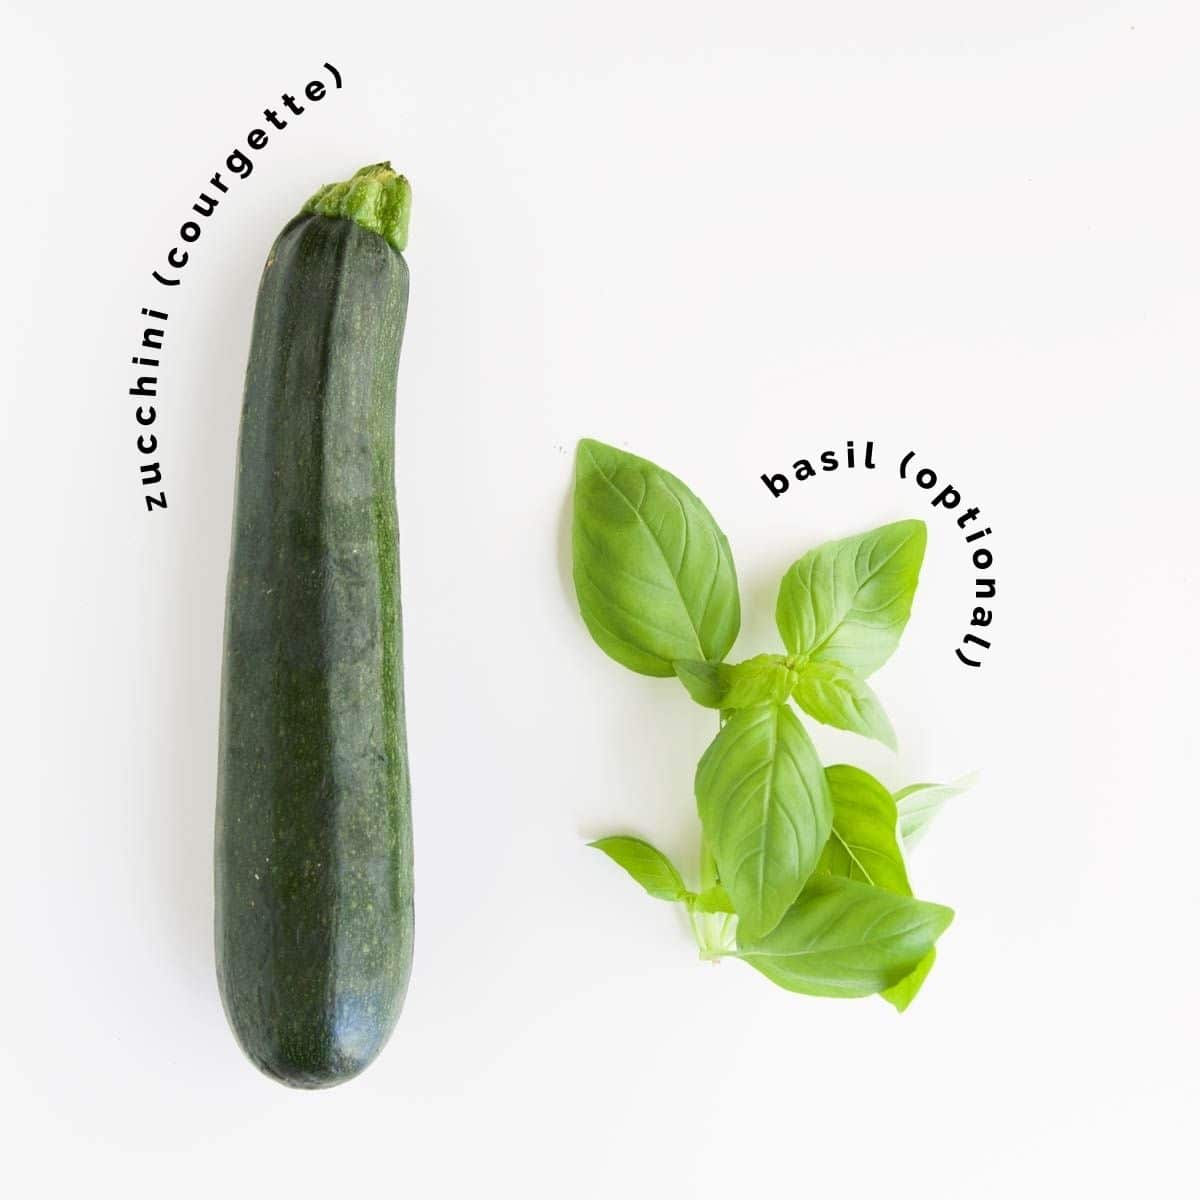 Flat Lay of Zucchini and Basil (Labelled)